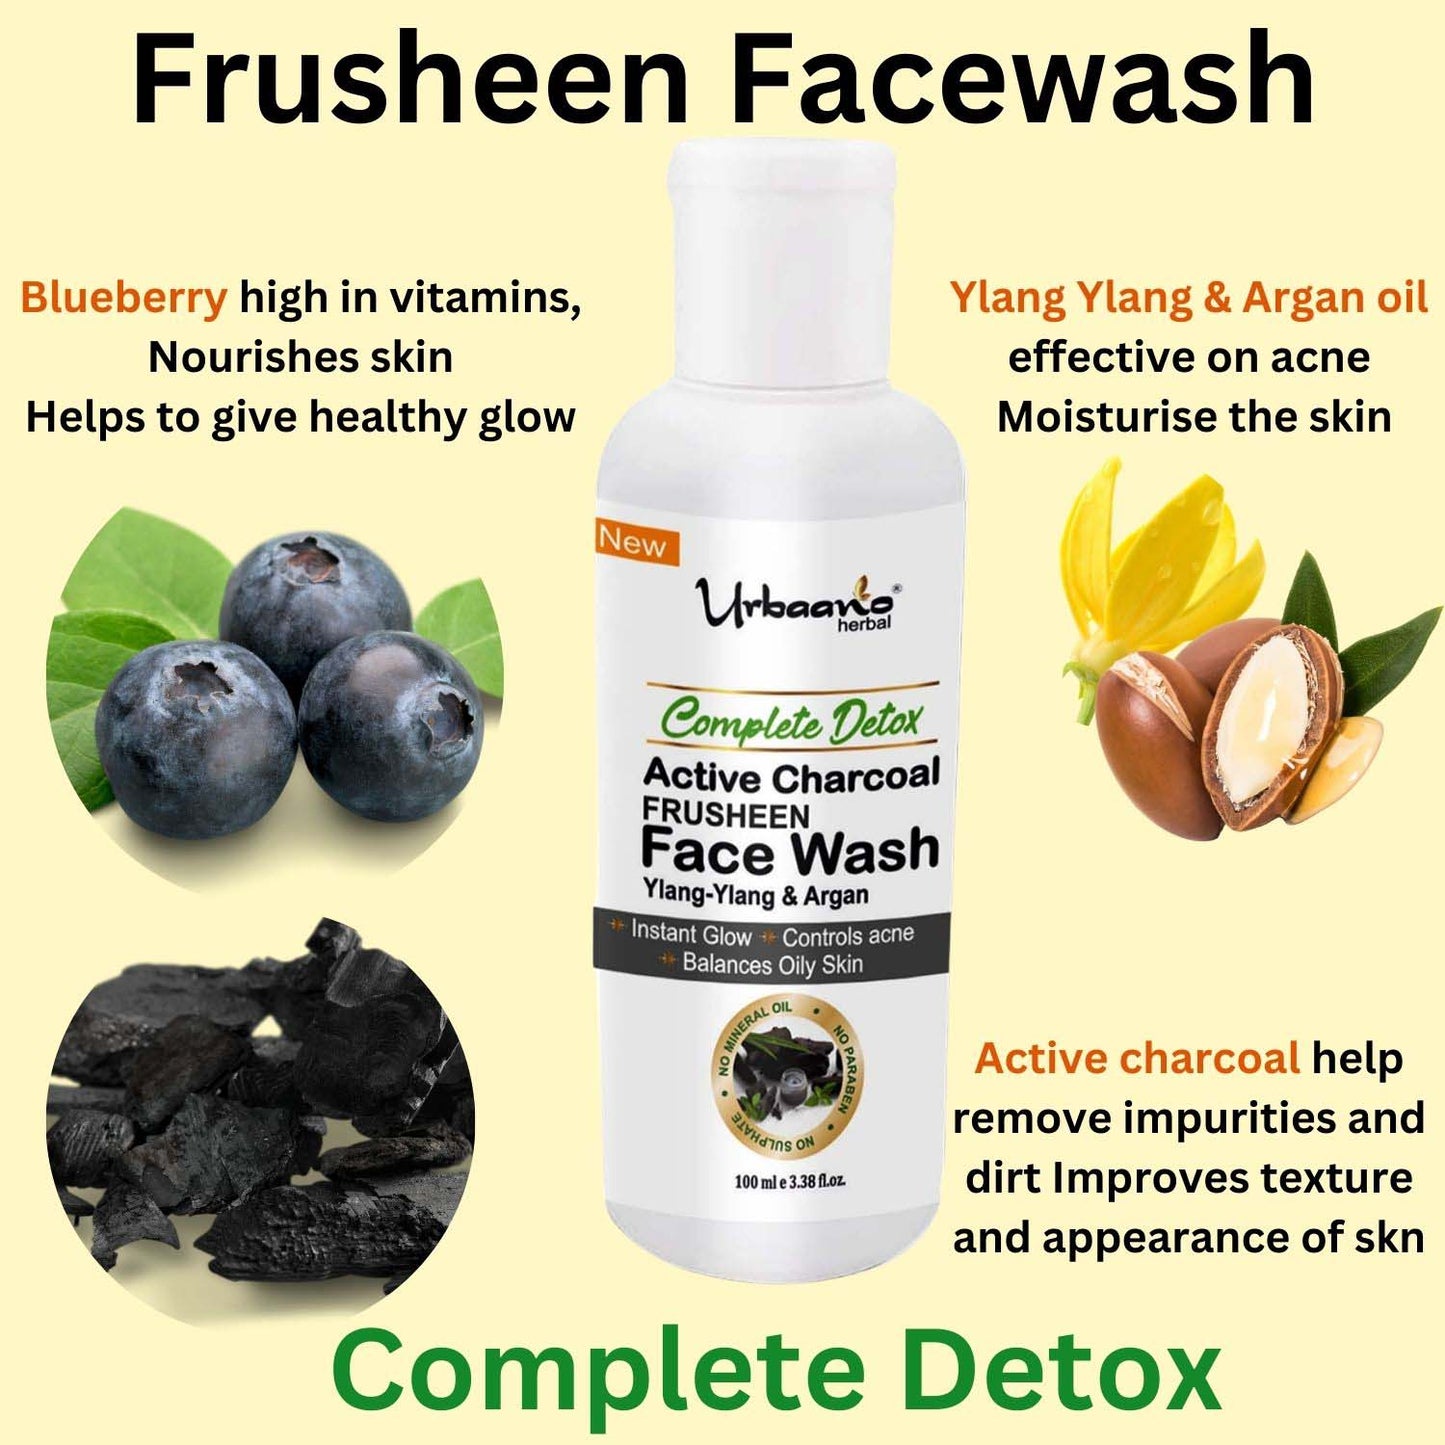 urbaano herbal frusheen face wash charcoal for detox with blueberry, yland ylang, argan ol for nourishment and facial cleansing